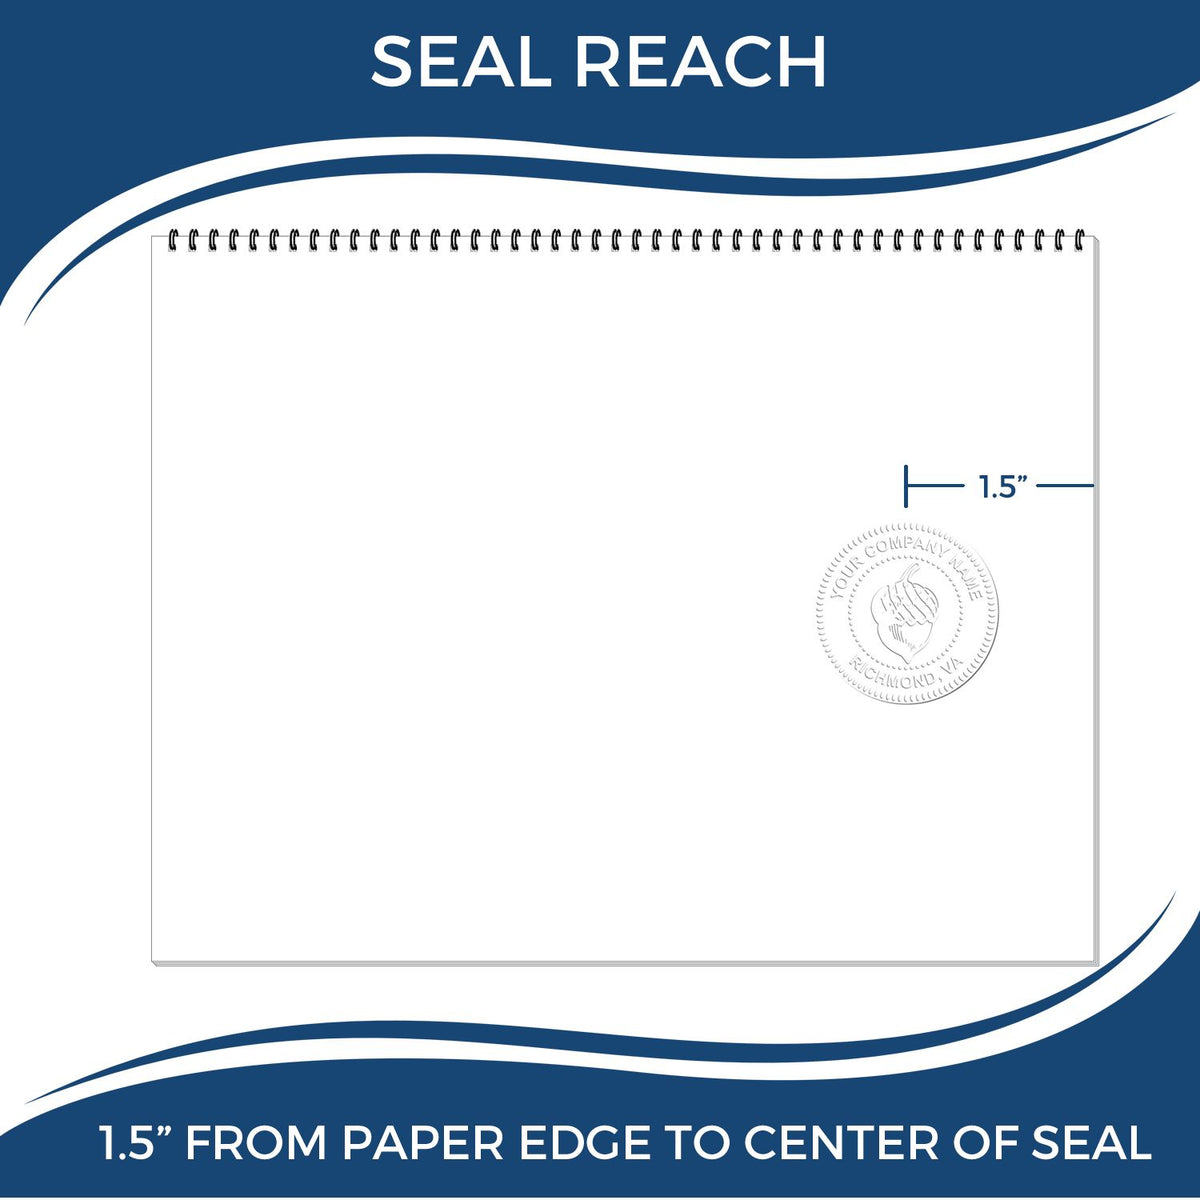 An infographic showing the seal reach which is represented by a ruler and a miniature seal image of the Soft Georgia Professional Engineer Seal